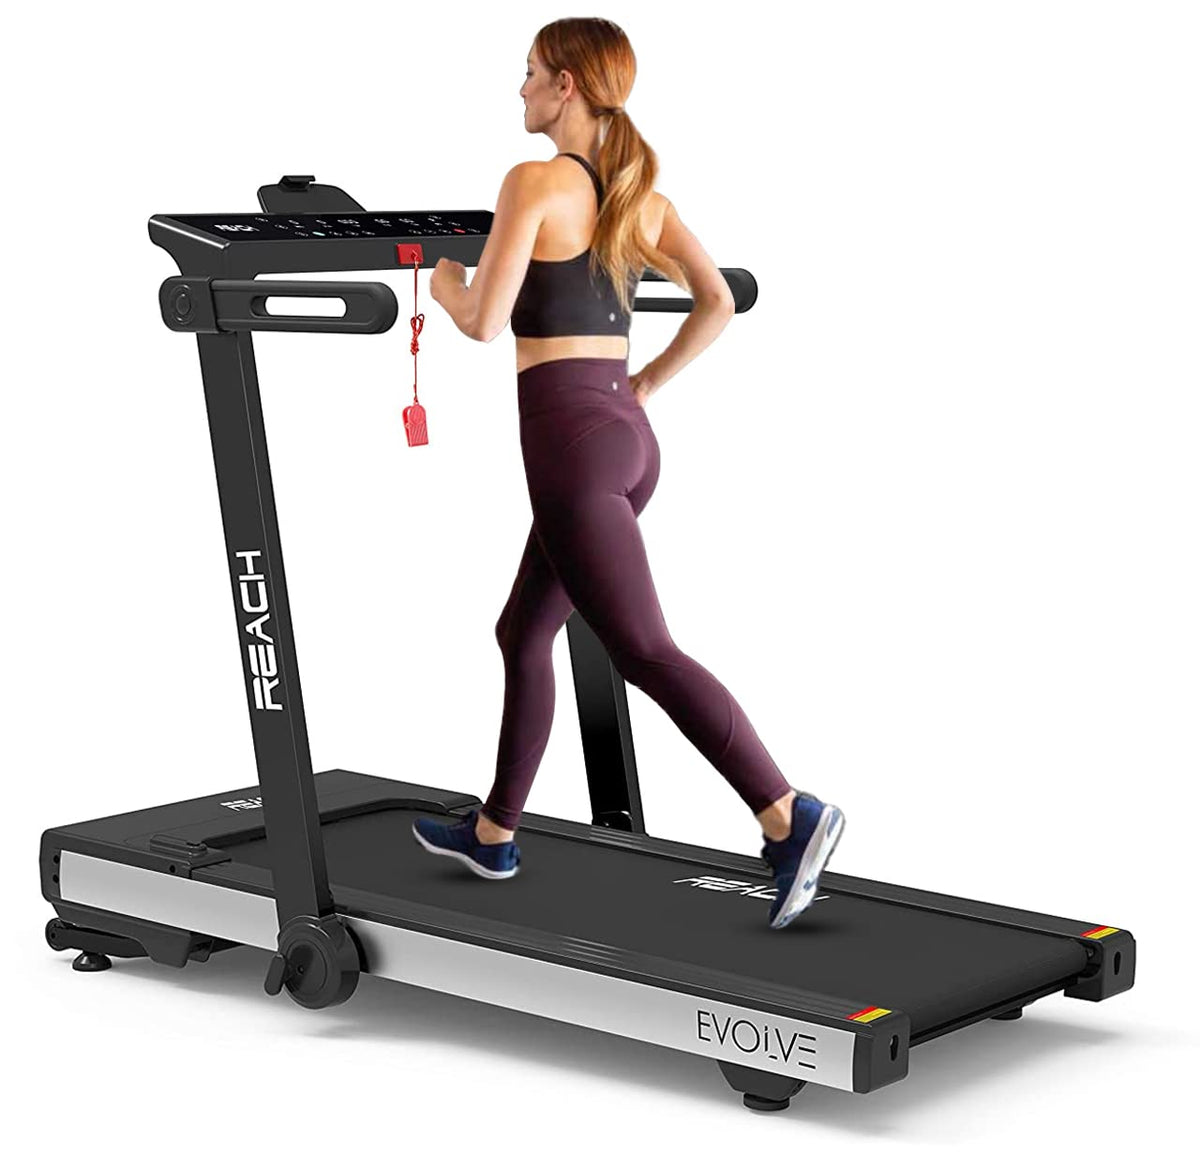 Reach Evolve 6 HP Peak | For Running Walking & Jogging with Auto Incline | 90 Degree Foldable Treadmill for Home Gym | Fitness Machine with LCD Display & Bluetooth | 15 Preset Workouts for Cardio | 16 km/hr Max User Weight 110 kgs